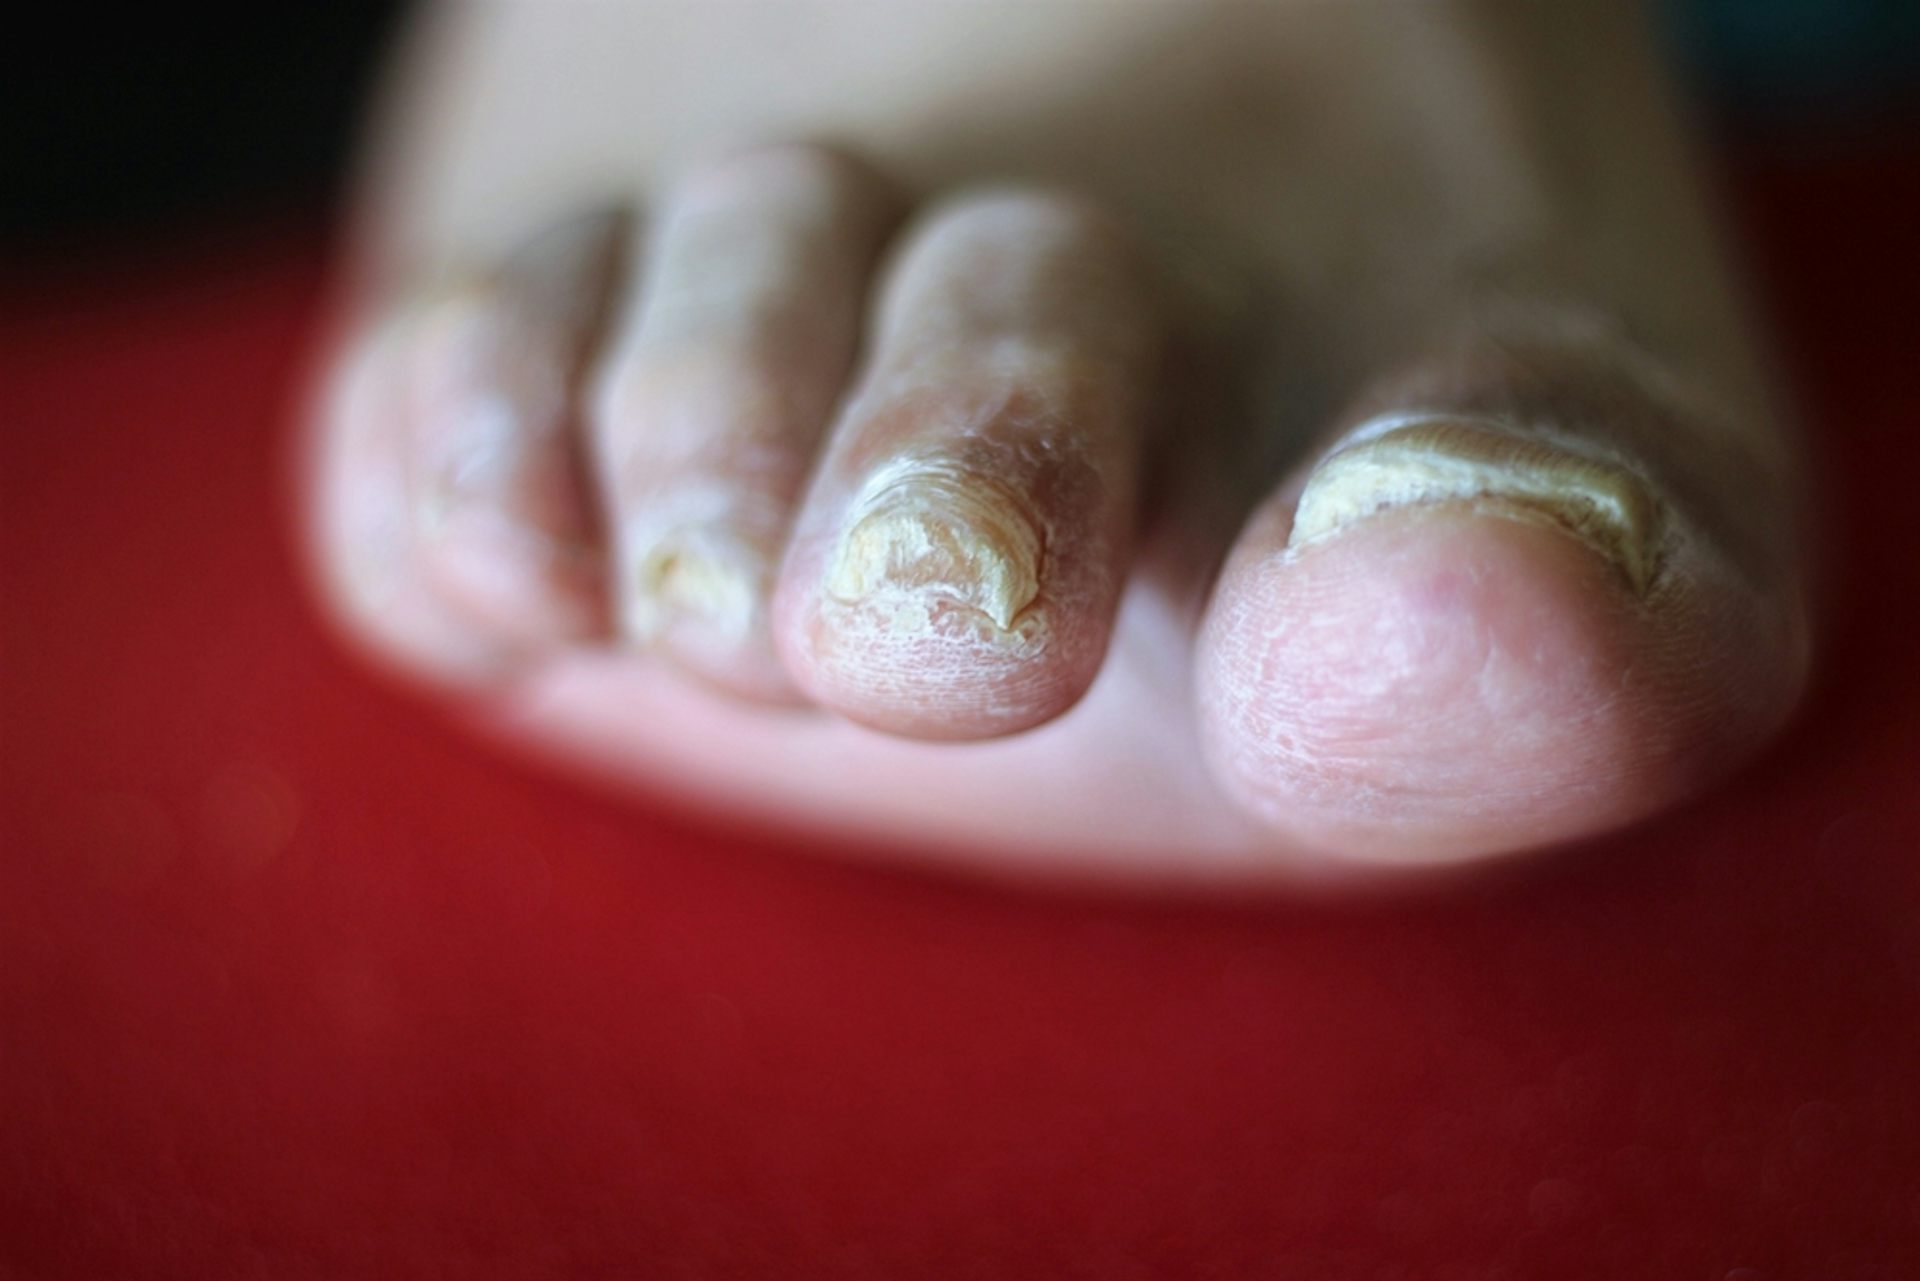 A step-by-step guide to nailing onychomycosis | Happiest health